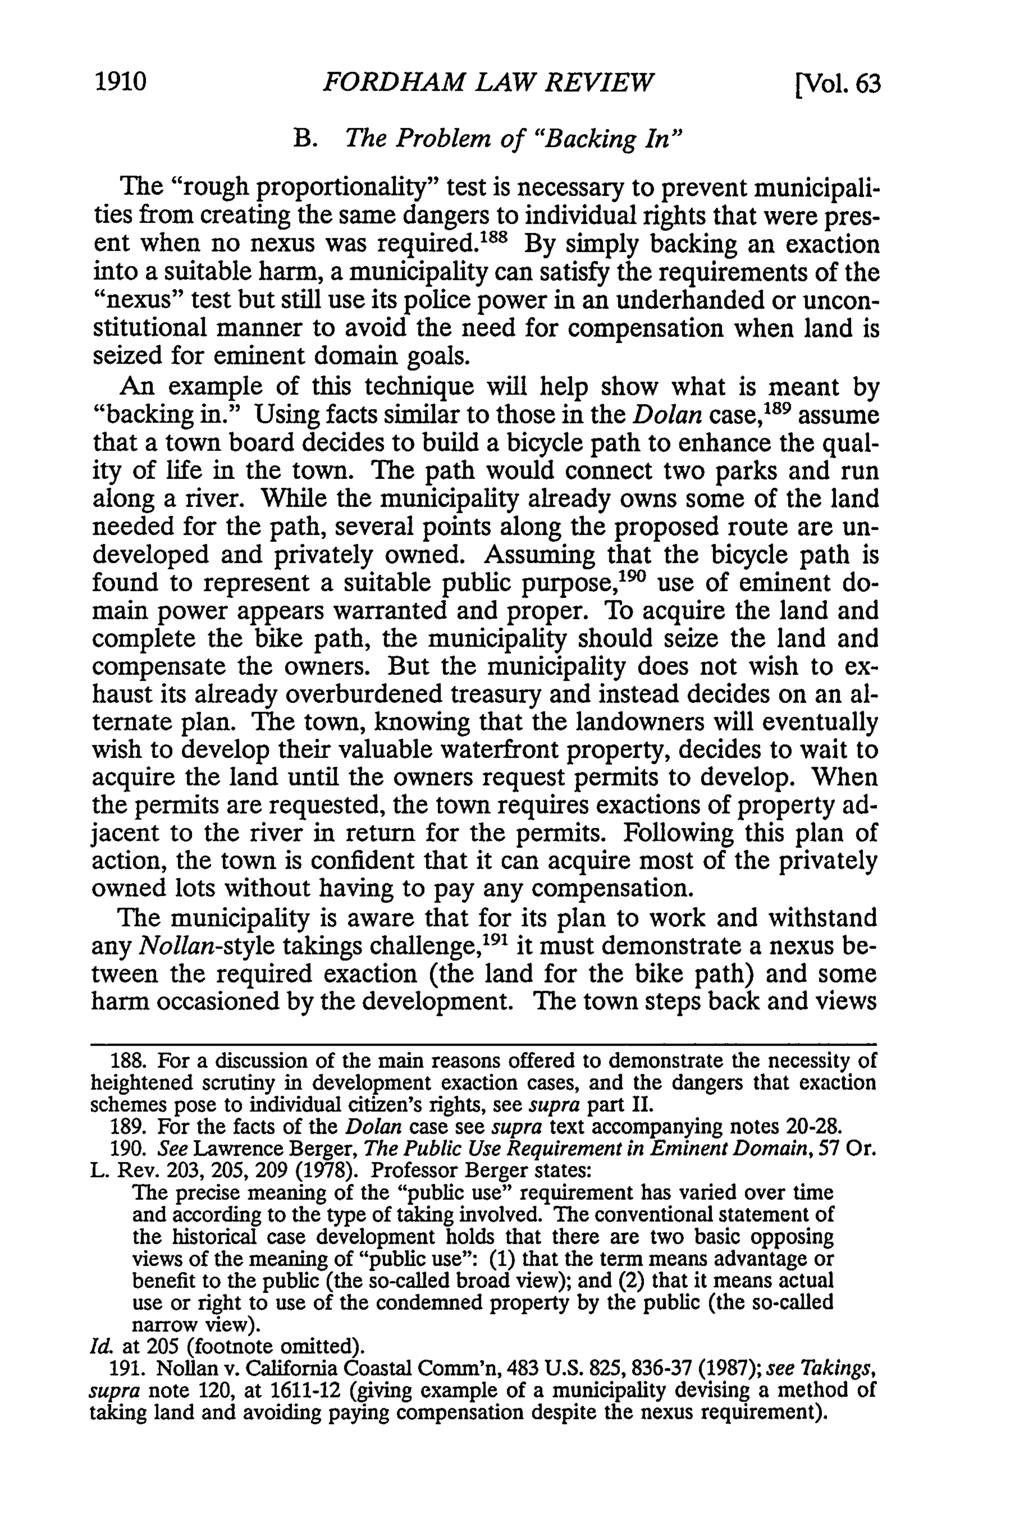 1910 FORDHAM LAW REVIEW B. The Problem of "Backing In" [Vol.